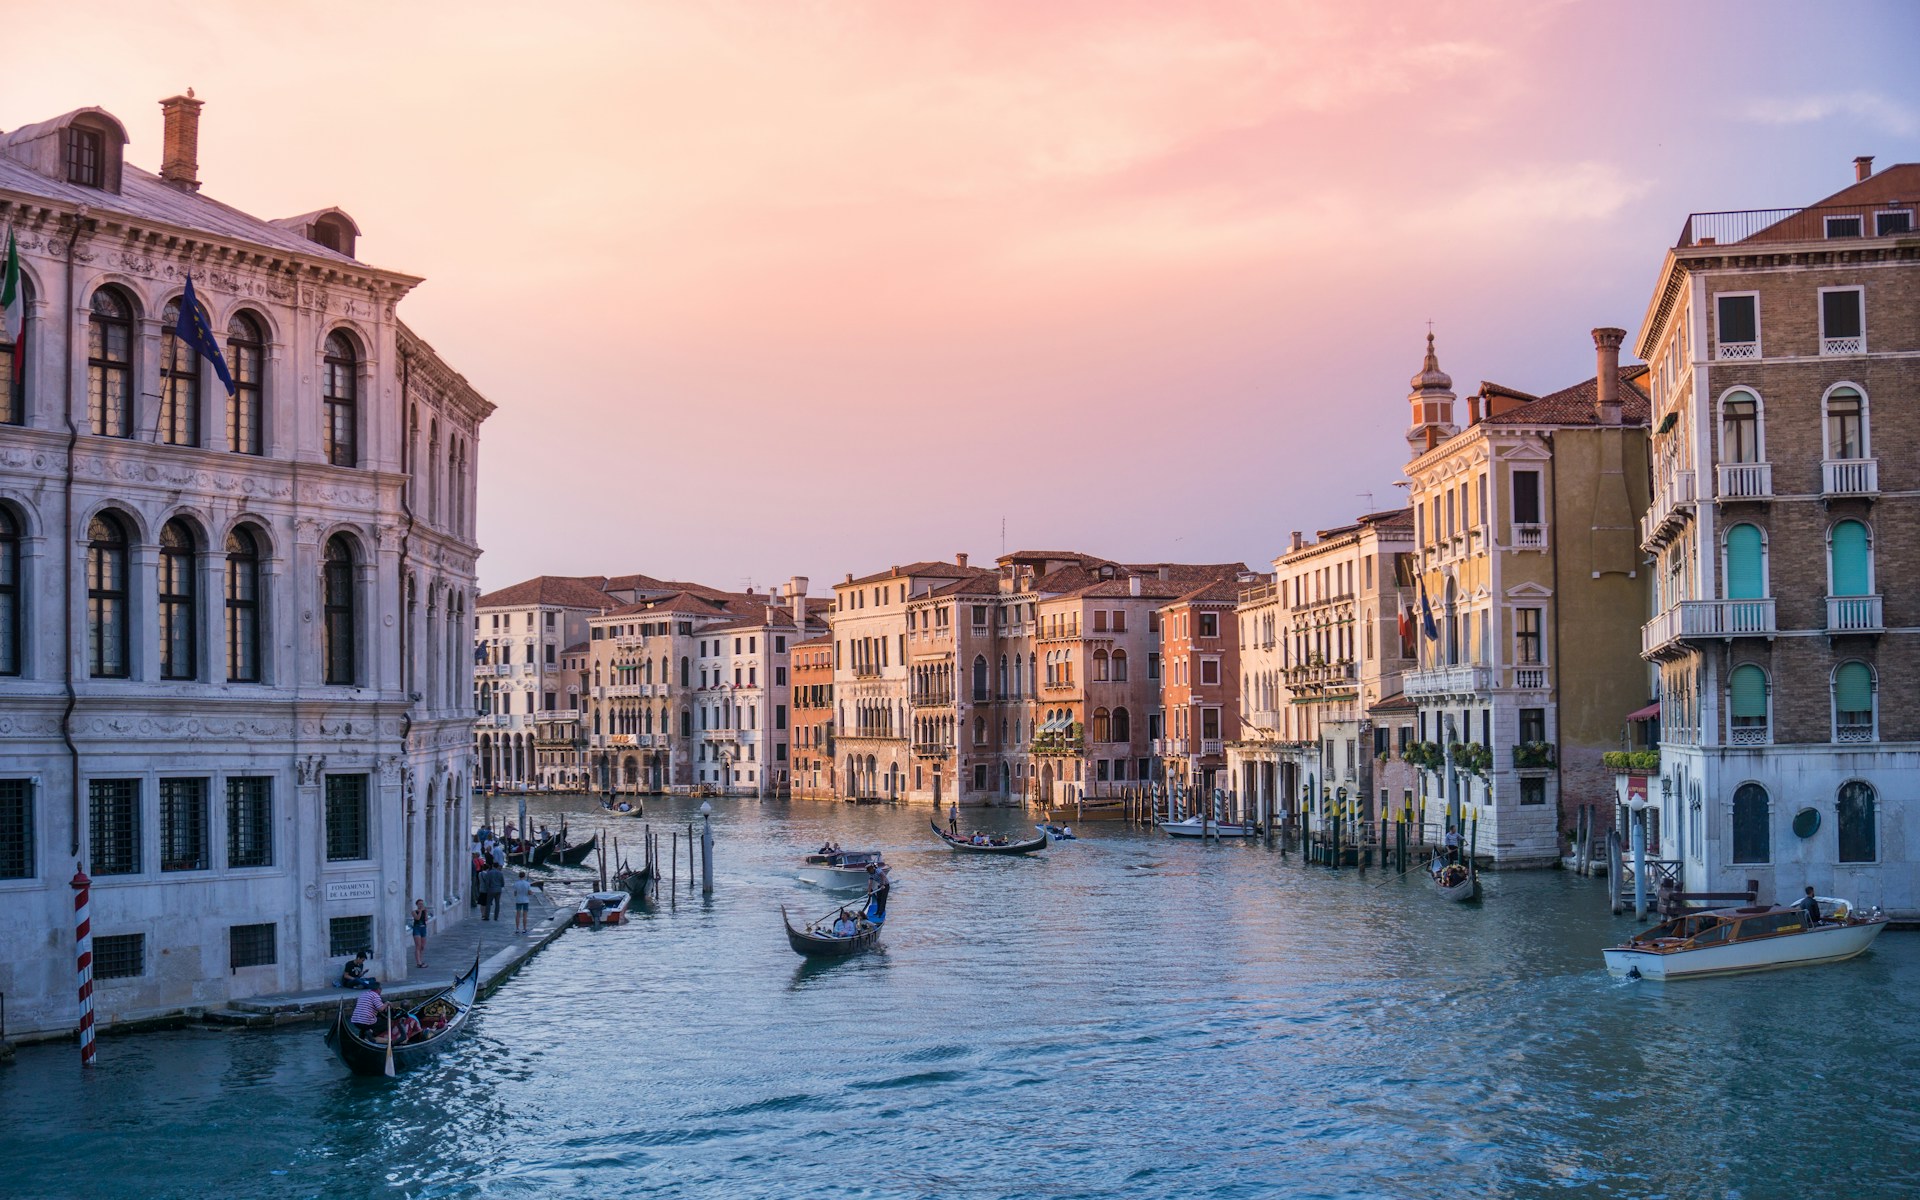 view of the canal and the buildings around it in Venice, Italy